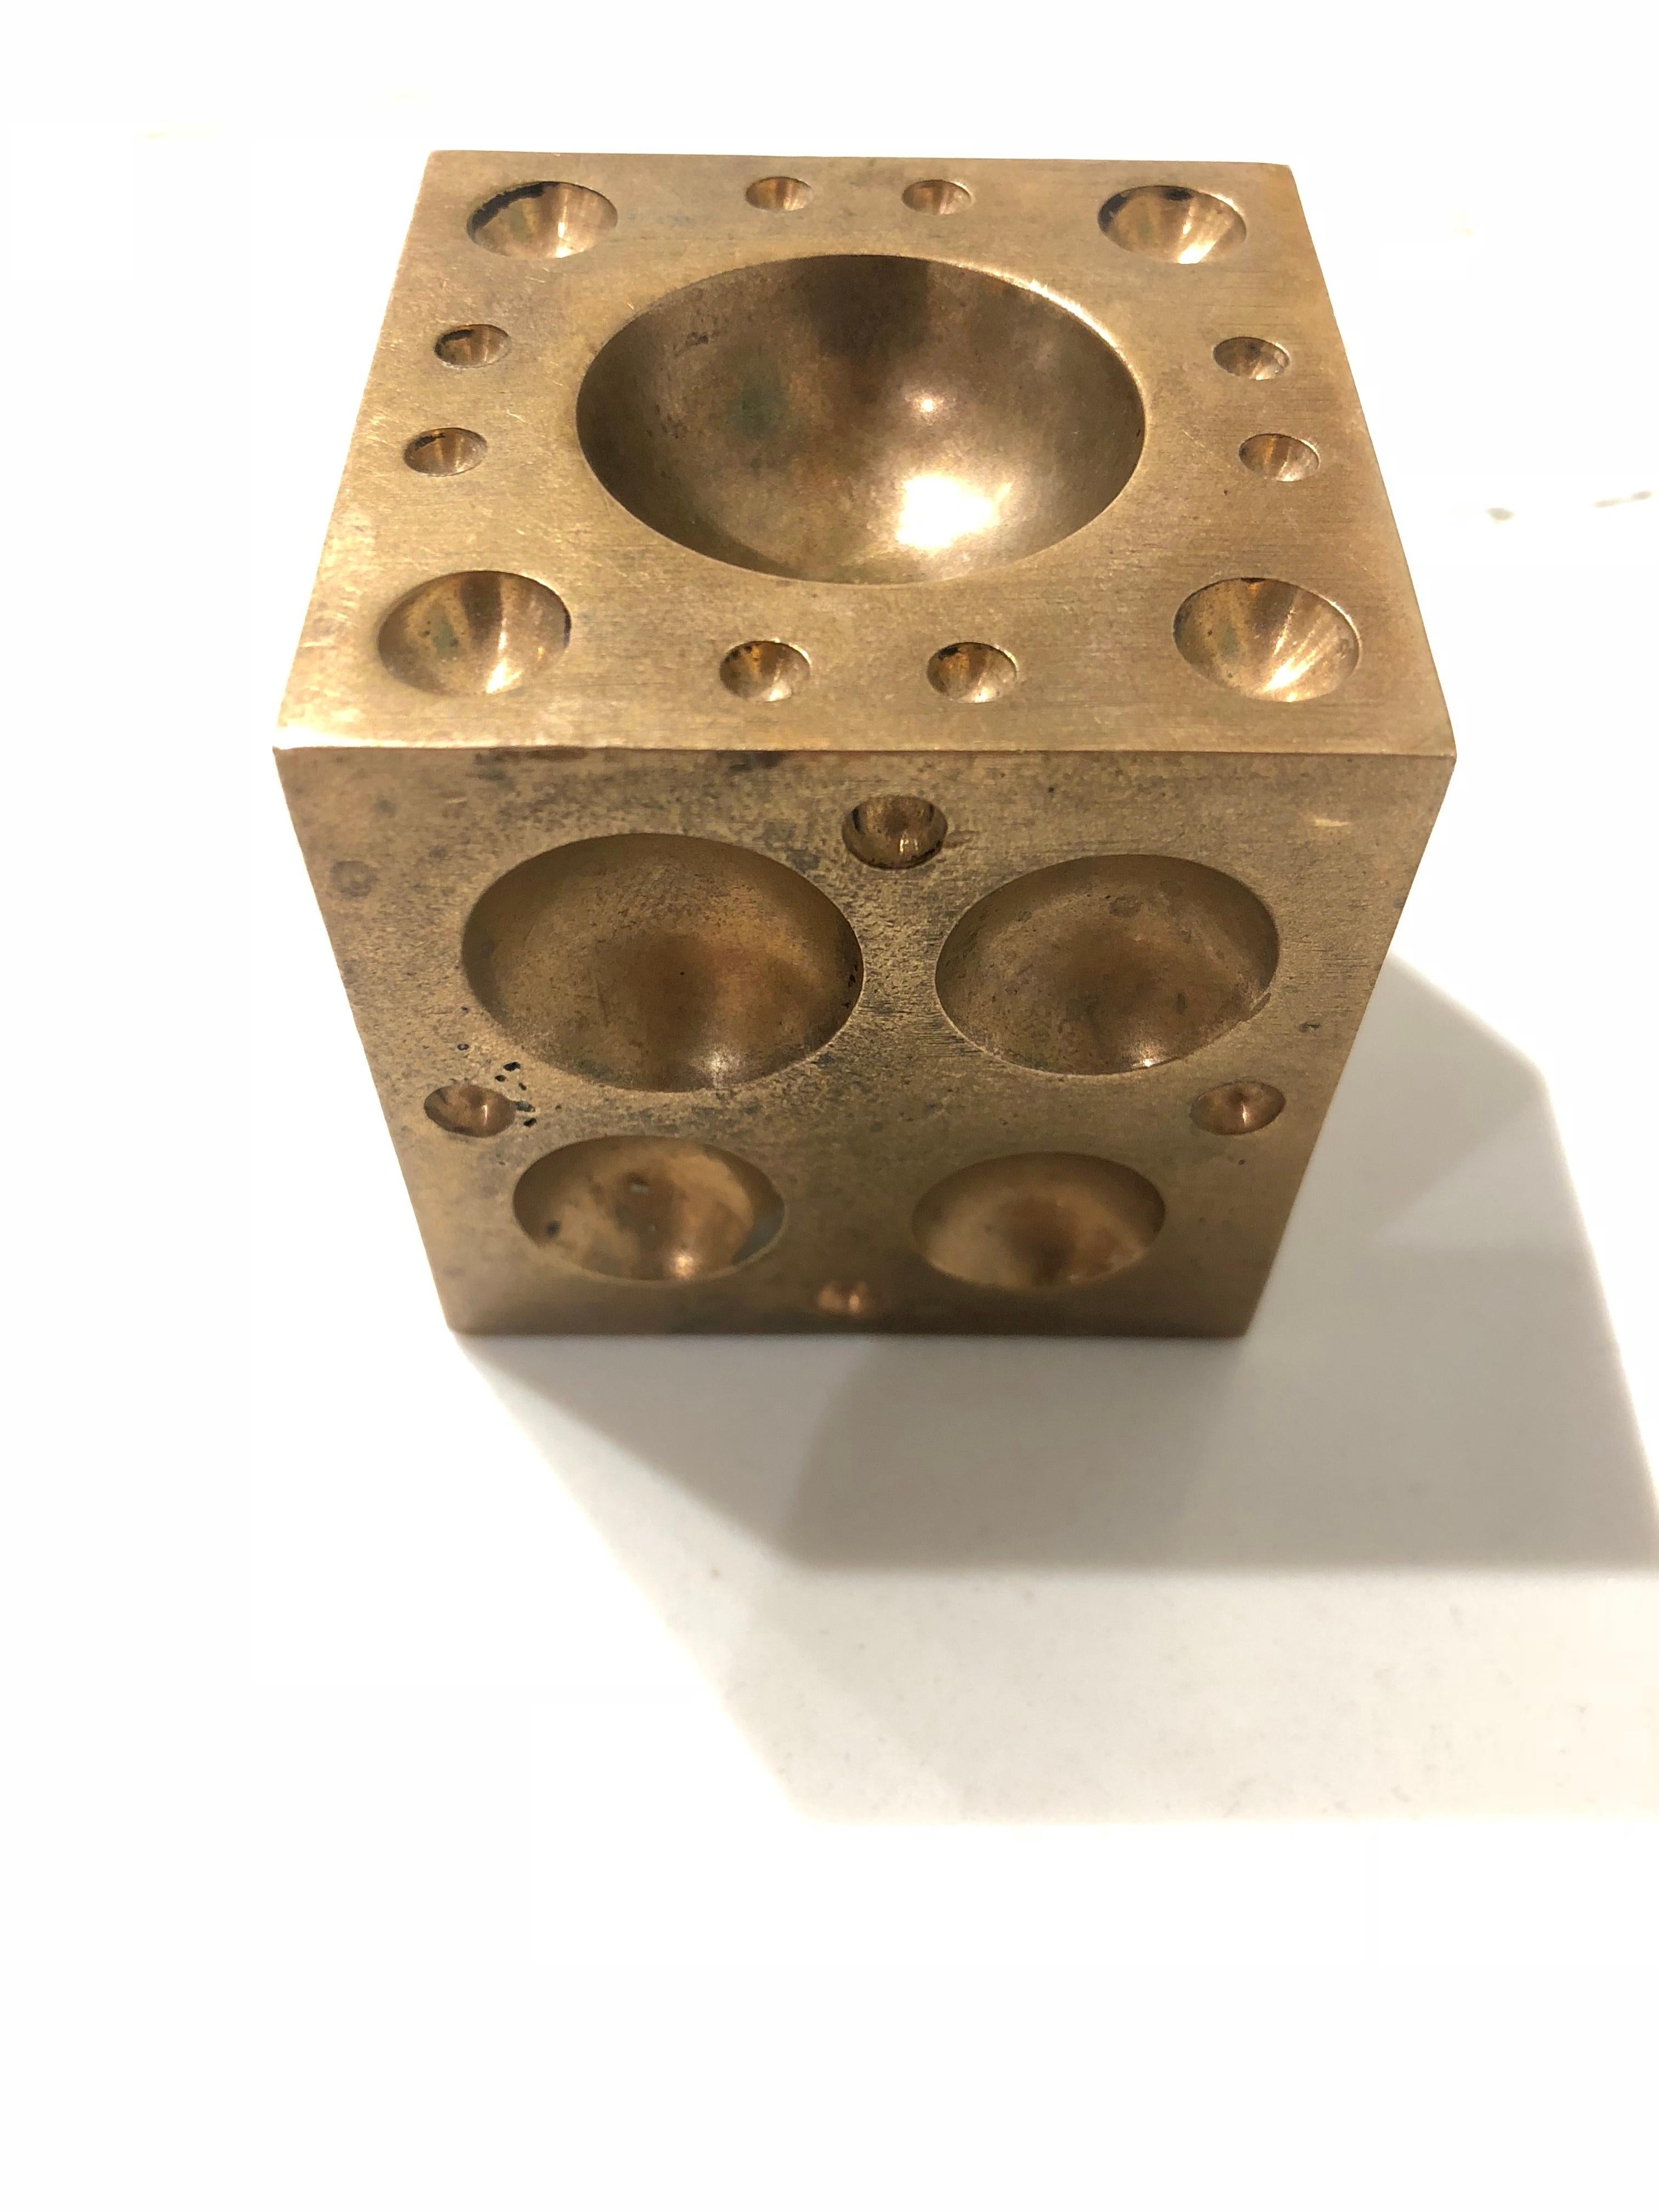 Nice and heavy unique paper weight sculpture, in solid brass each side comes with different sizes holes, circa 1970s.